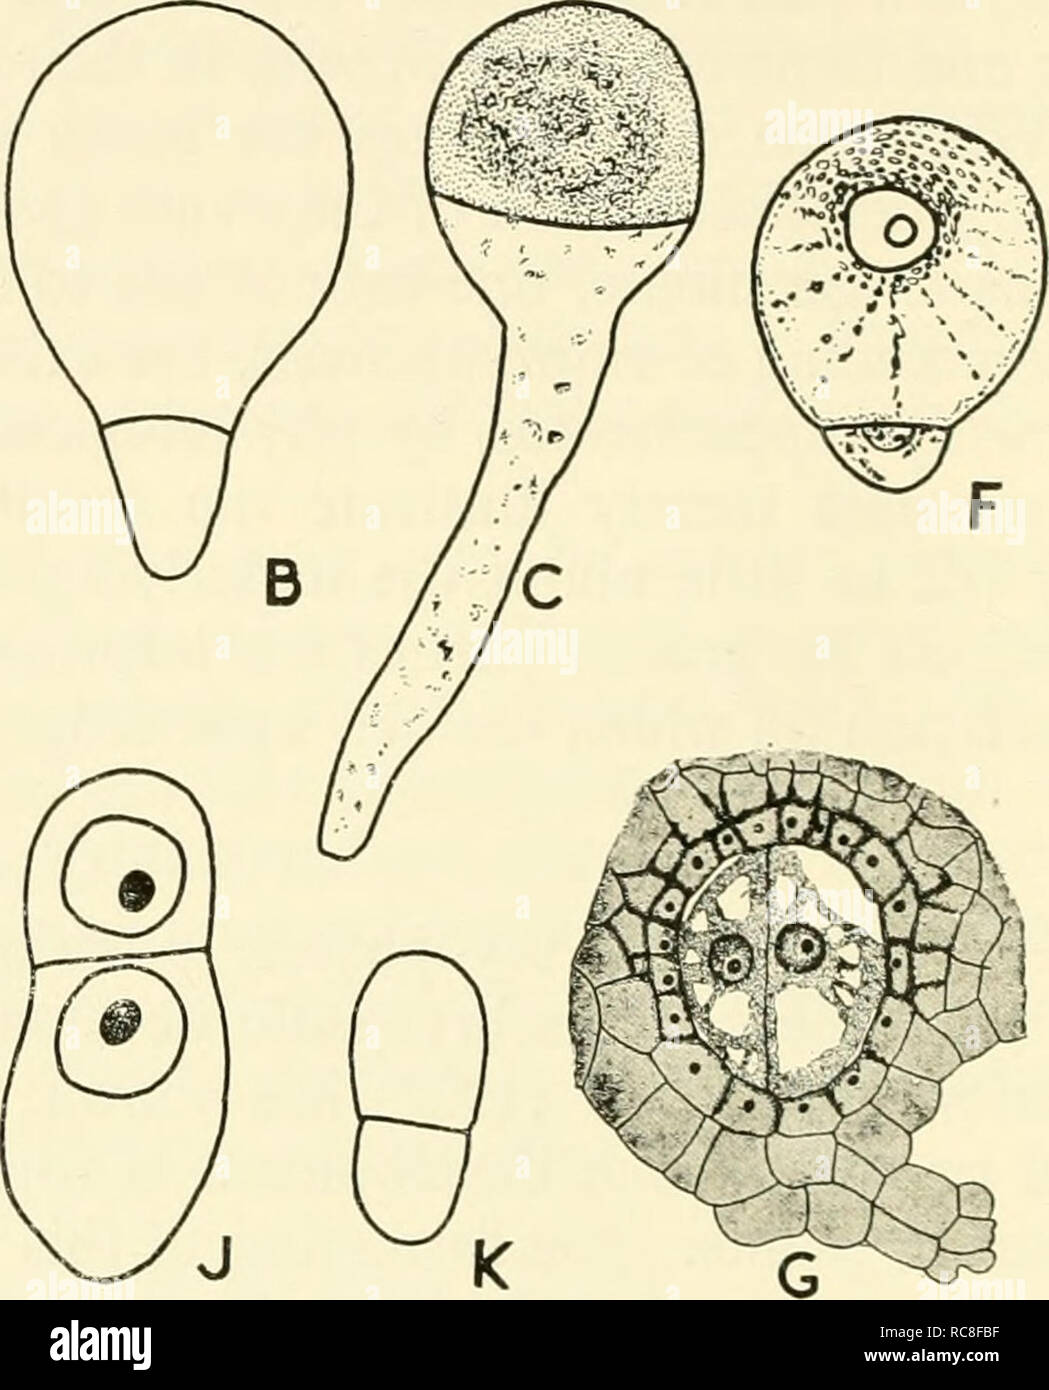 . Embryogenesis in plants. Embryology. Fig. 2. The first division of the zygote or spore in different groups A, Spirogyra velata, germinating zygospore (after West and Fritsch). B, Fitcus sp. (after Rostafinski). C, Polysiphonia alrorubescens, germinating tetraspore (after Chemin). D, Targionia hypophylla (after Campbell). E, Radiila sp. (after Leitgeb). F, Osmuuda claytoniaiia, germinating spore (after Campbell). G, AdiaiUiim concin- num, divided zygote (after Atkinson). H, Lycopodium phlegmaria (after Treub). J, Clienopodium bonus-hemiciis. K, Liiiida forsteri (after Soueges). prothallus) or Stock Photo